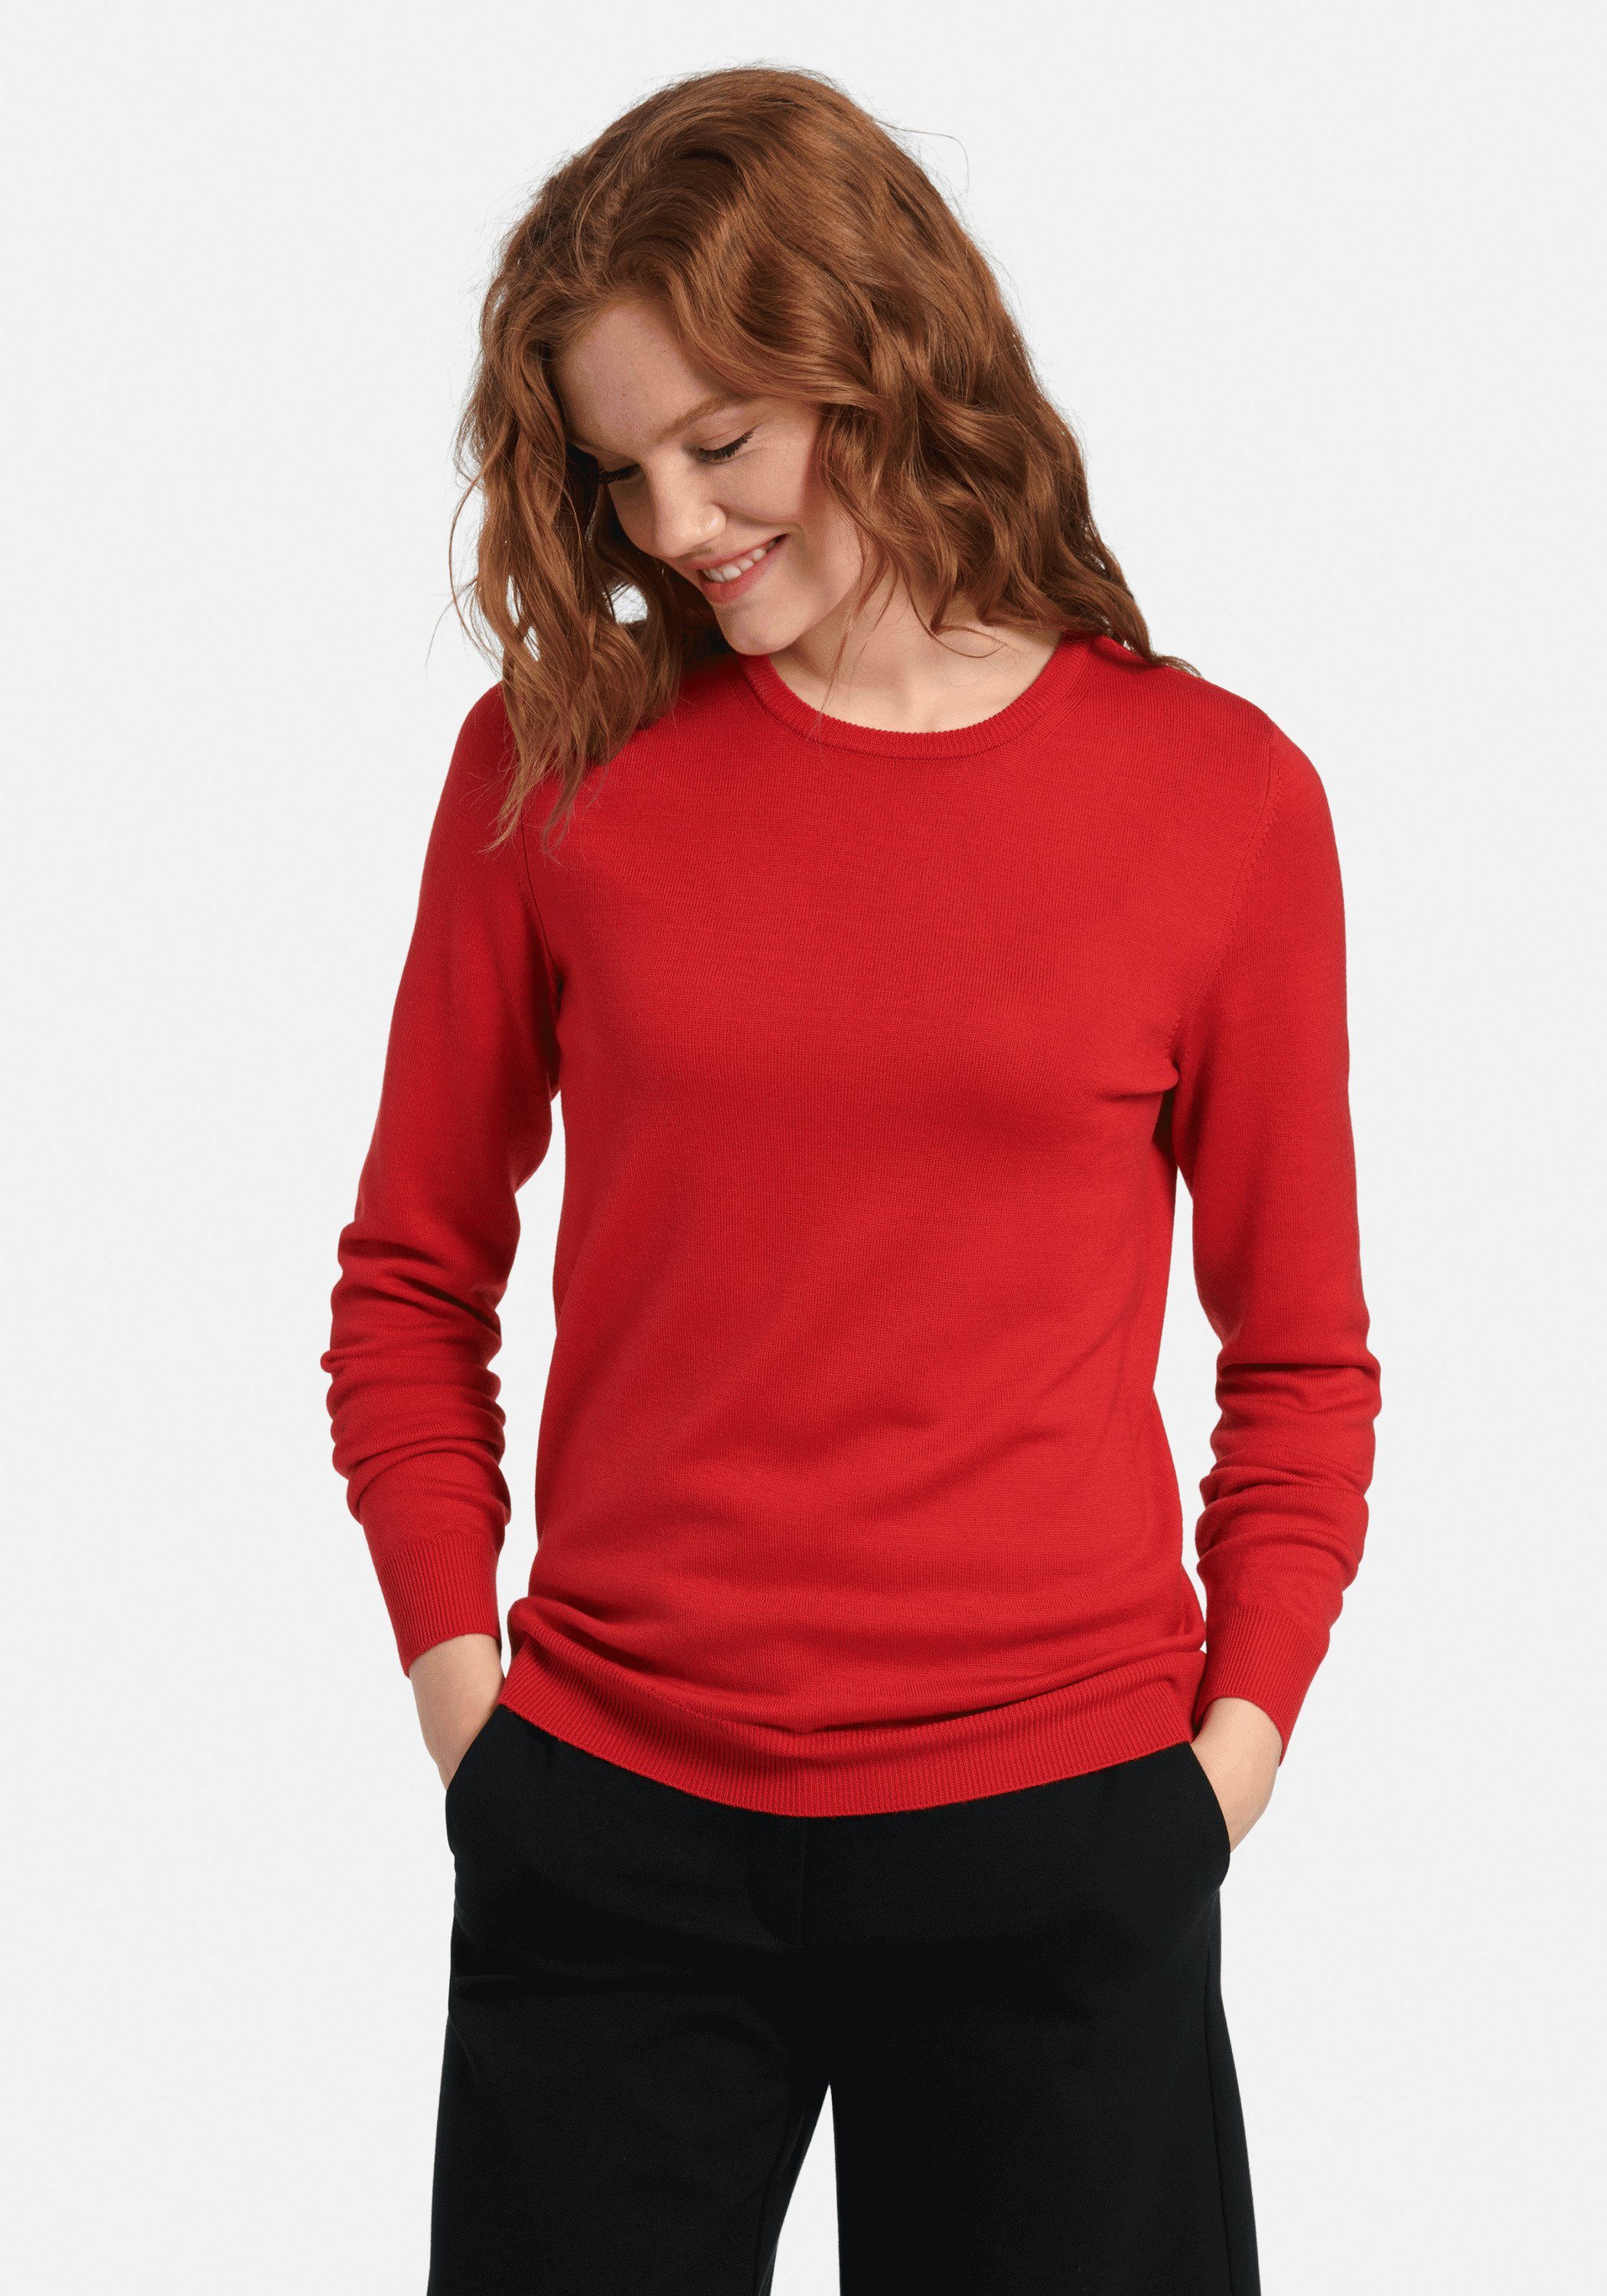 RED new wool Hahn Strickpullover . Peter